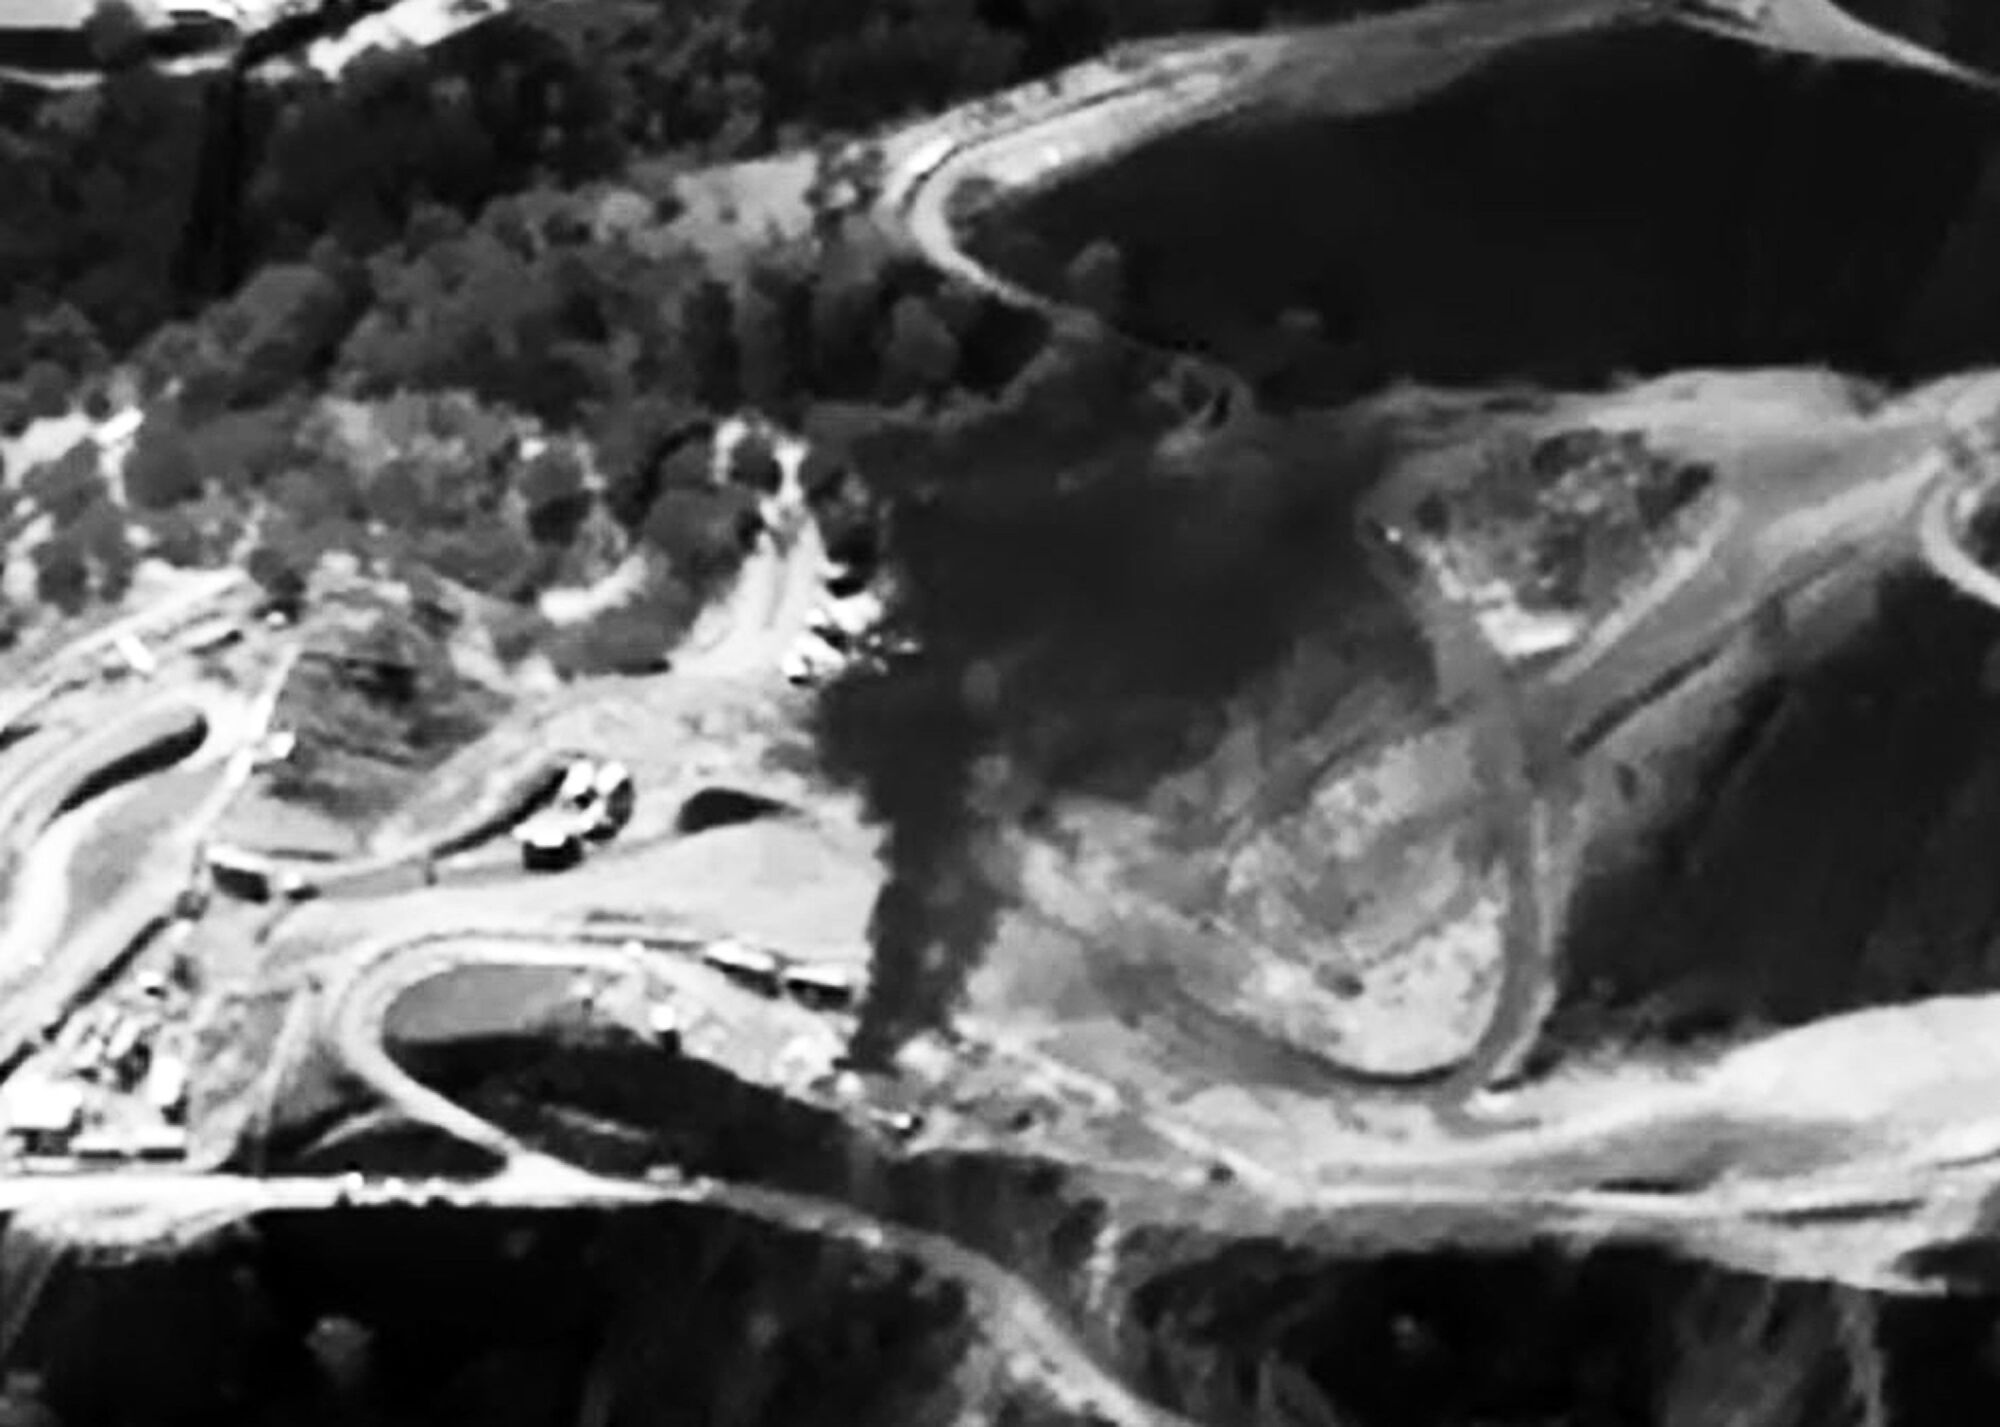 An infrared image shows methane gas leaking.